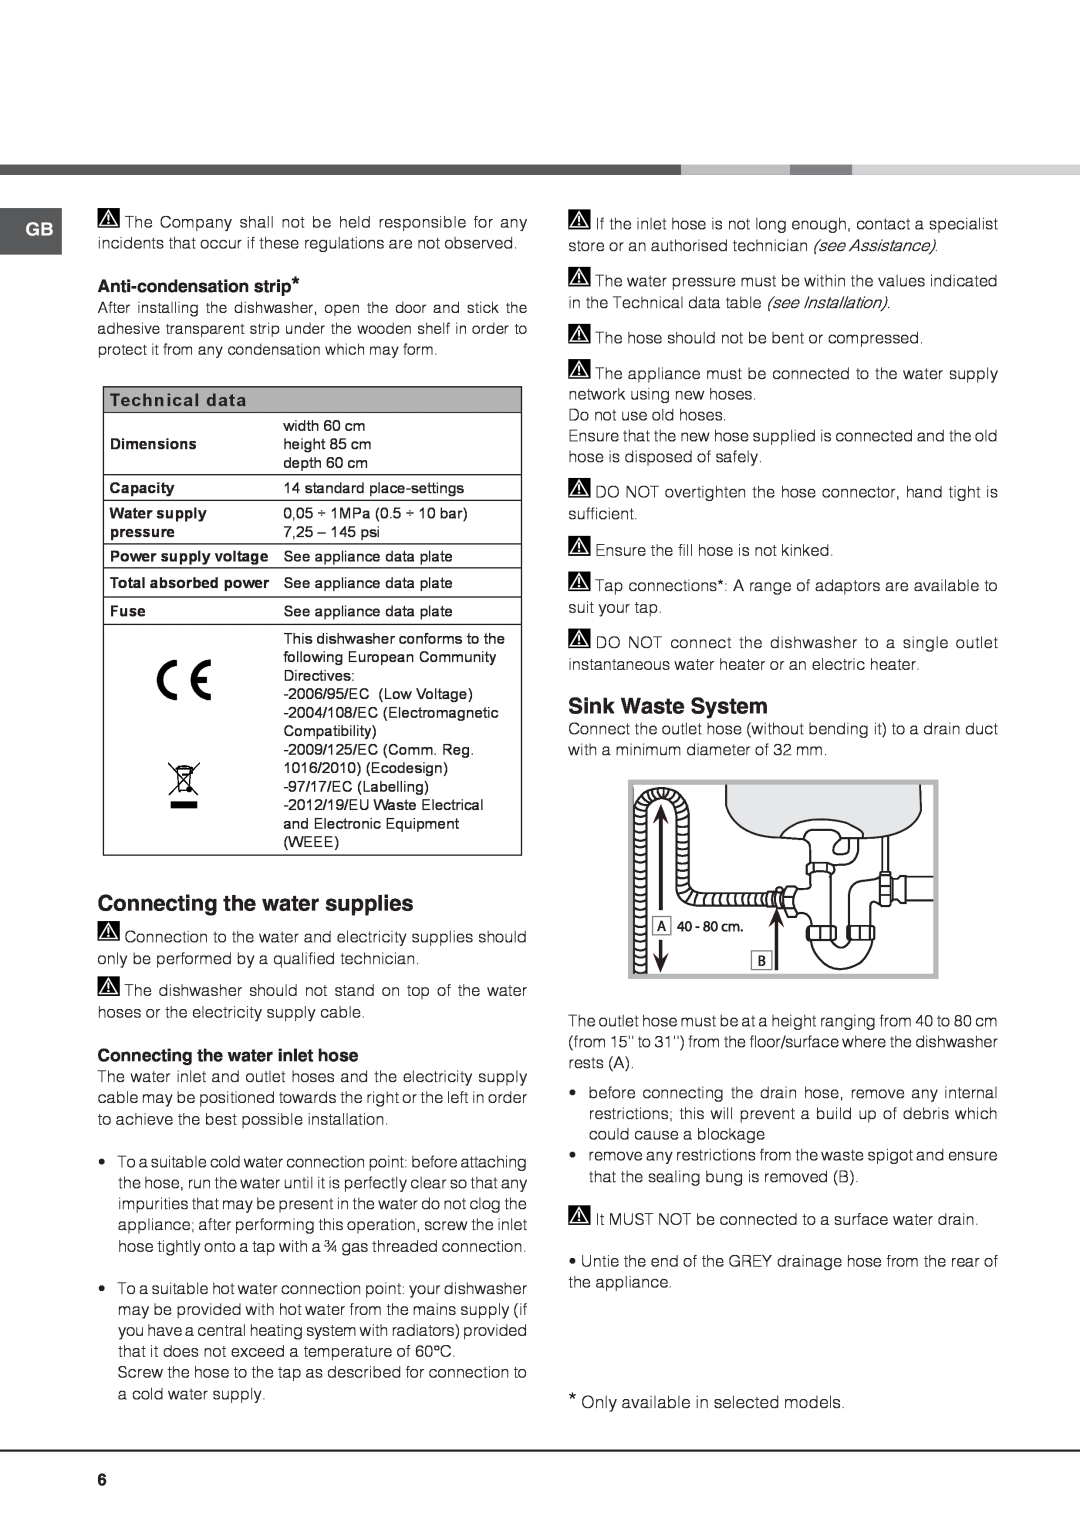 Hotpoint FDUD 43133 Ultima manual Connecting the water supplies, Sink Waste System, Anti-condensation strip, Technical data 